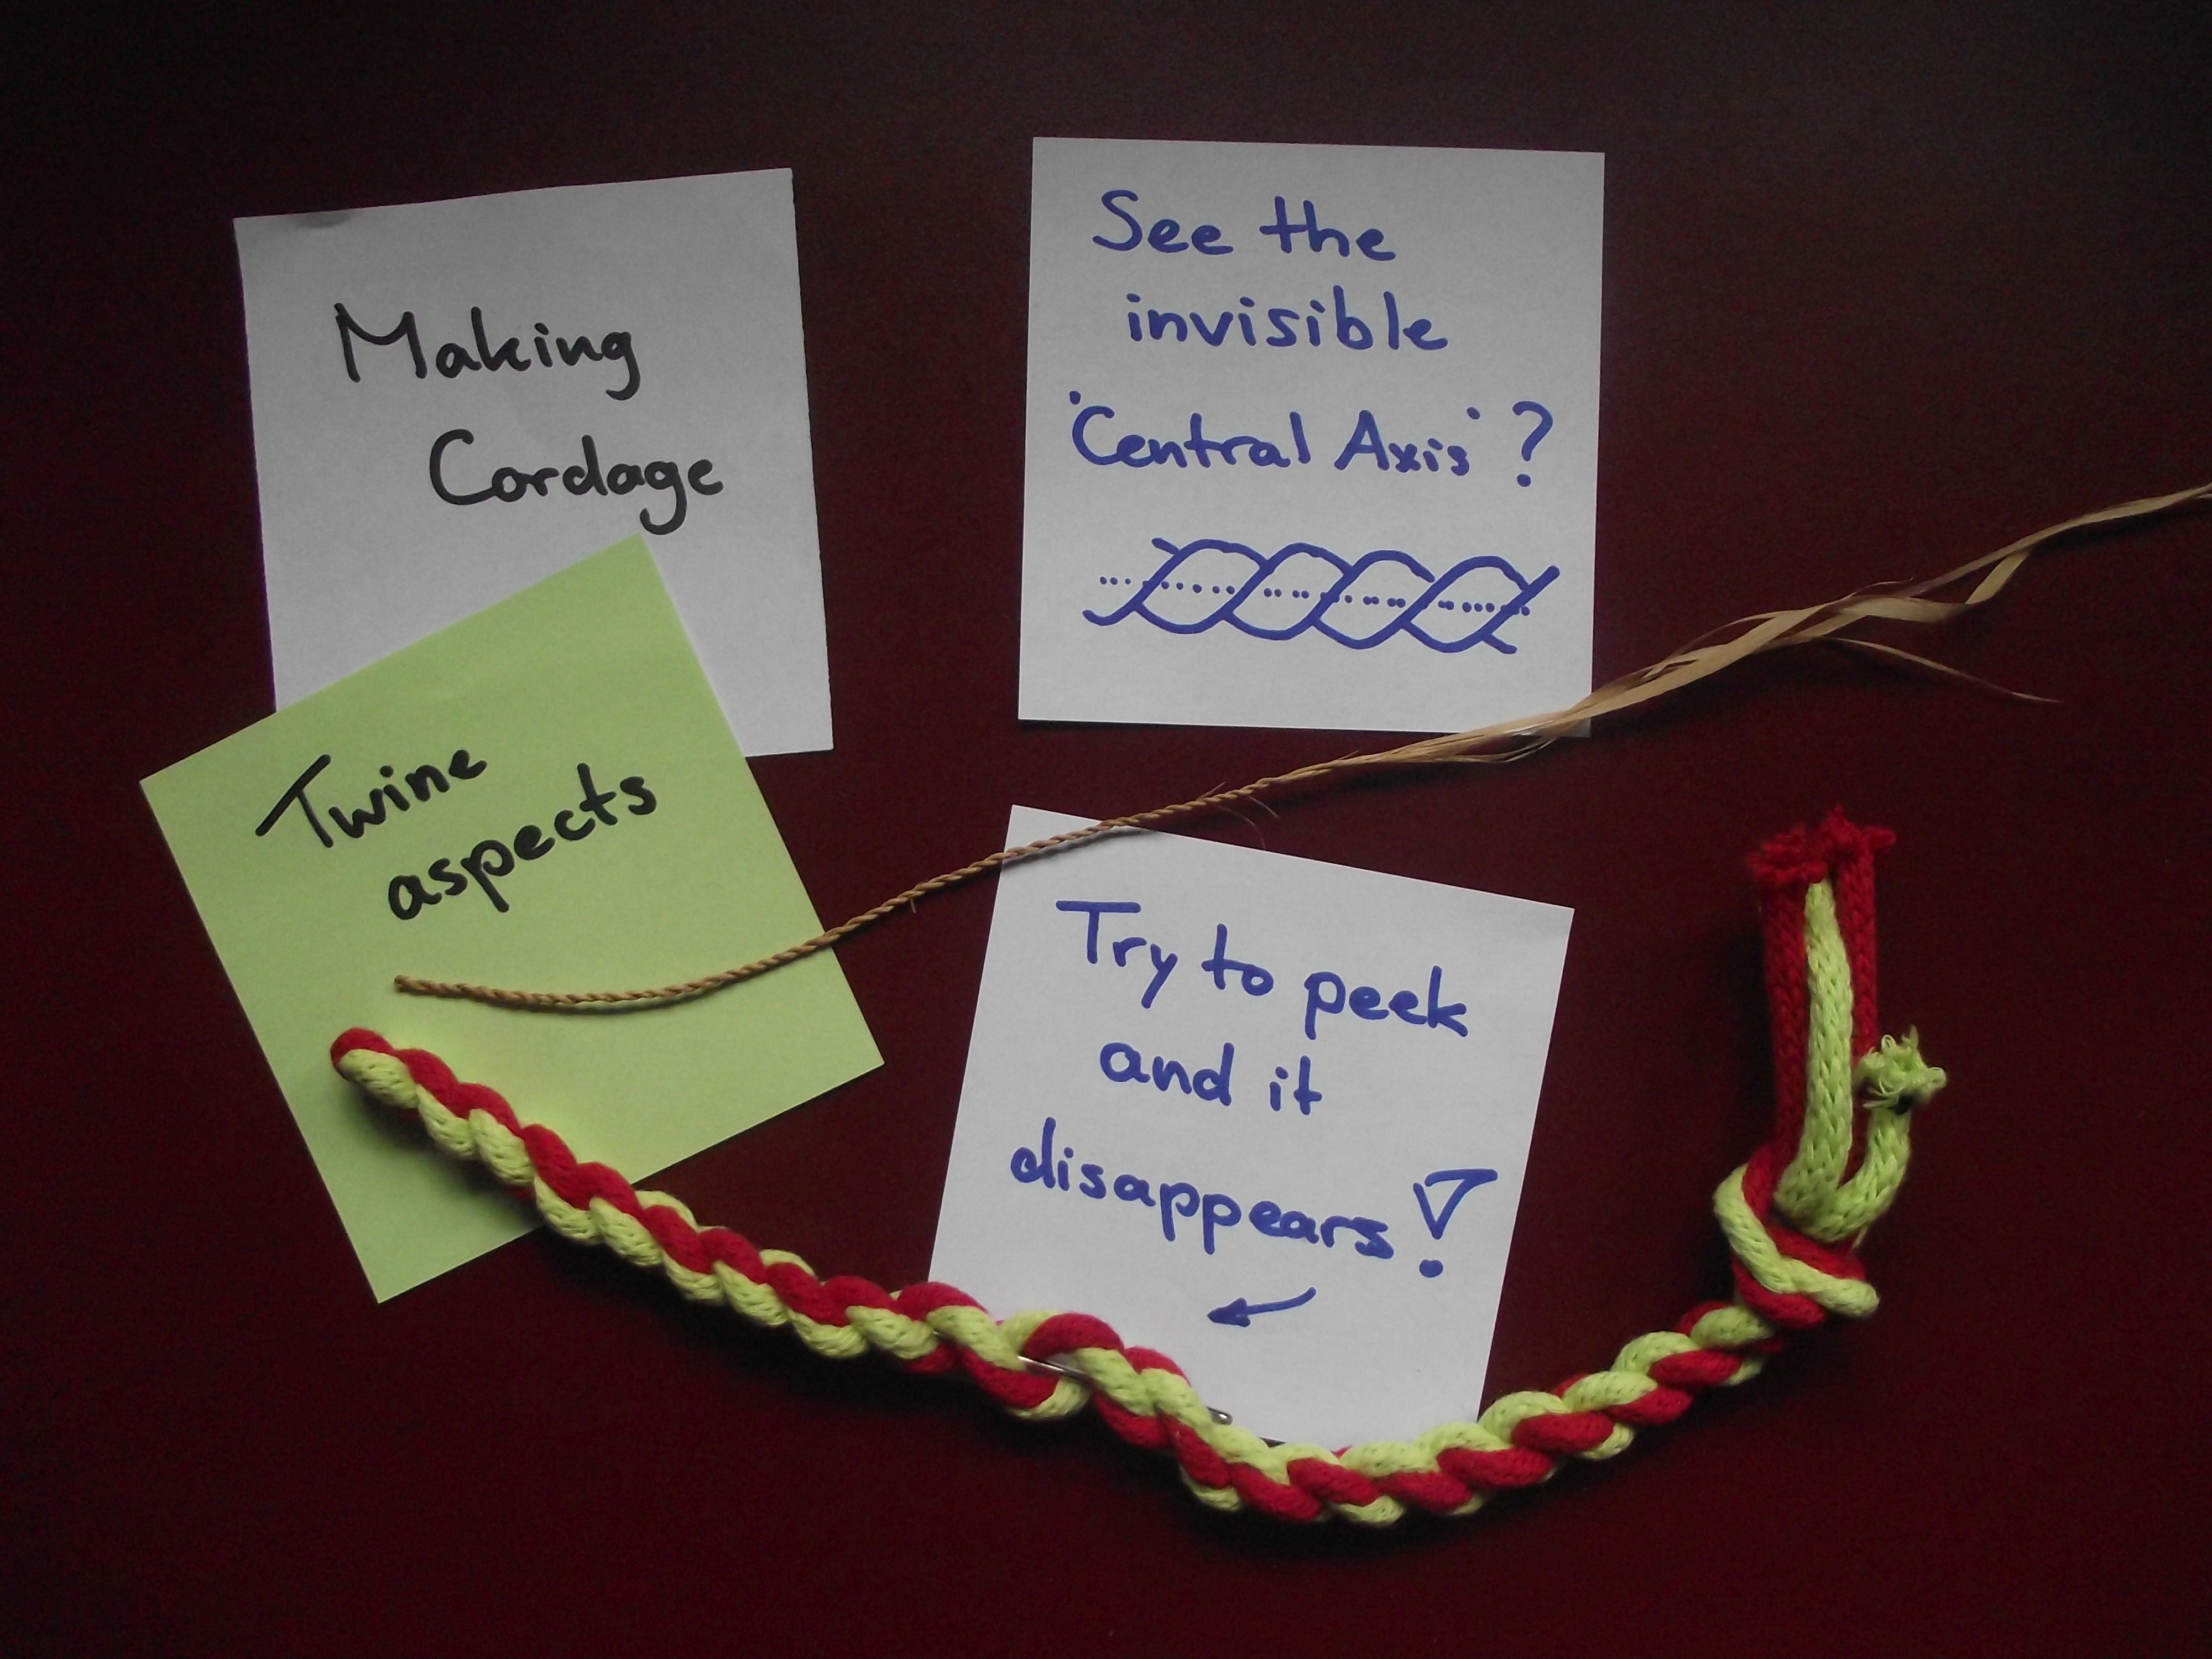 Making Cordage - Twine Aspects - See more